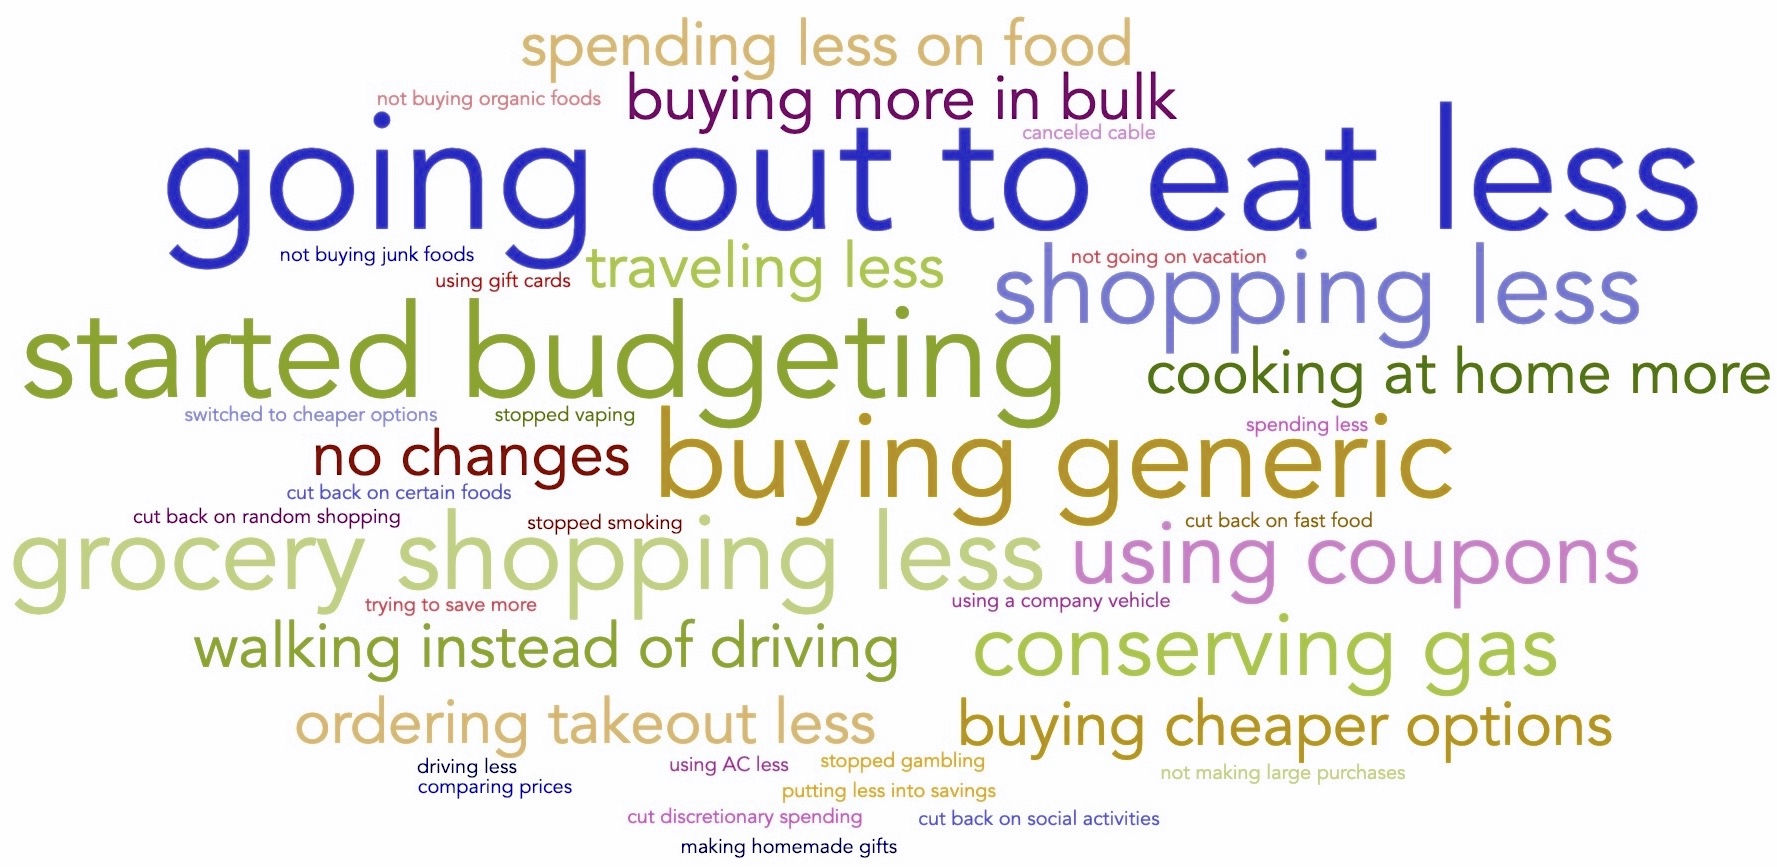 In a recent national survey on consumer spending habits, respondents were asked what changes they had made in their own spending and travel behaviors to save money. The most common responses were 1) going out to eat less 2) stricter budgeting and 3) buying generic items instead of brand names.